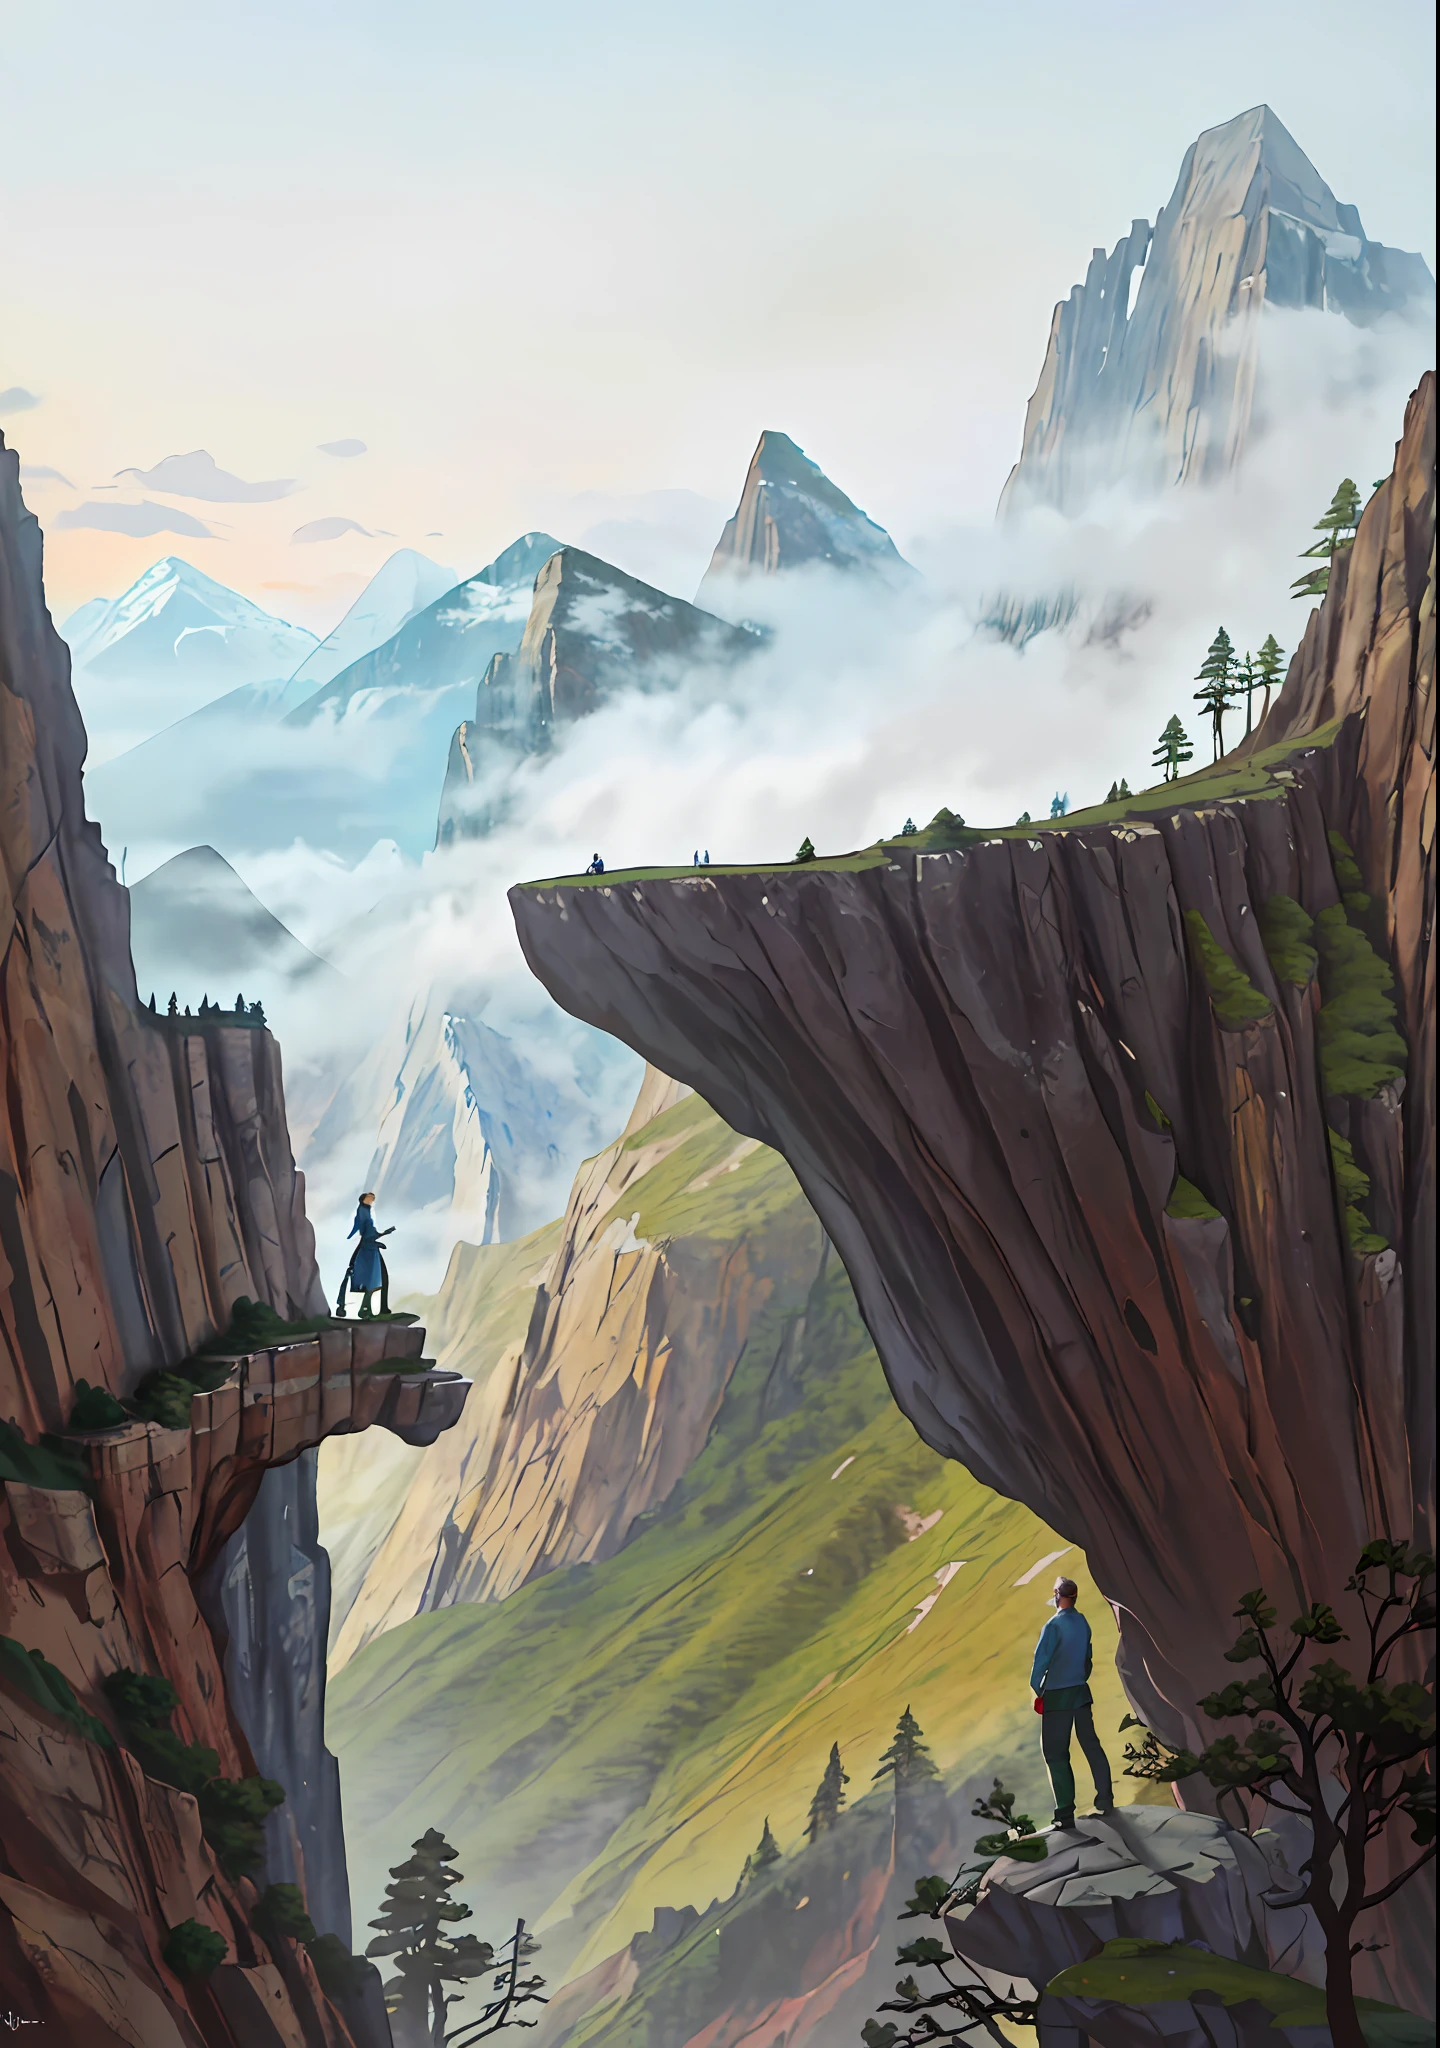 There is a painting，A man standing on a cliff, mountainside, cliffside, mountain scene, arte de fundo, Cliff side, low details. Digital painting, painted as a game concept art, mountainous background, Mountain background, scenery game concept art, detailed trees and cliffs, Detailed scenery —width 672, Anime landscape, background mountains, avatar landscape